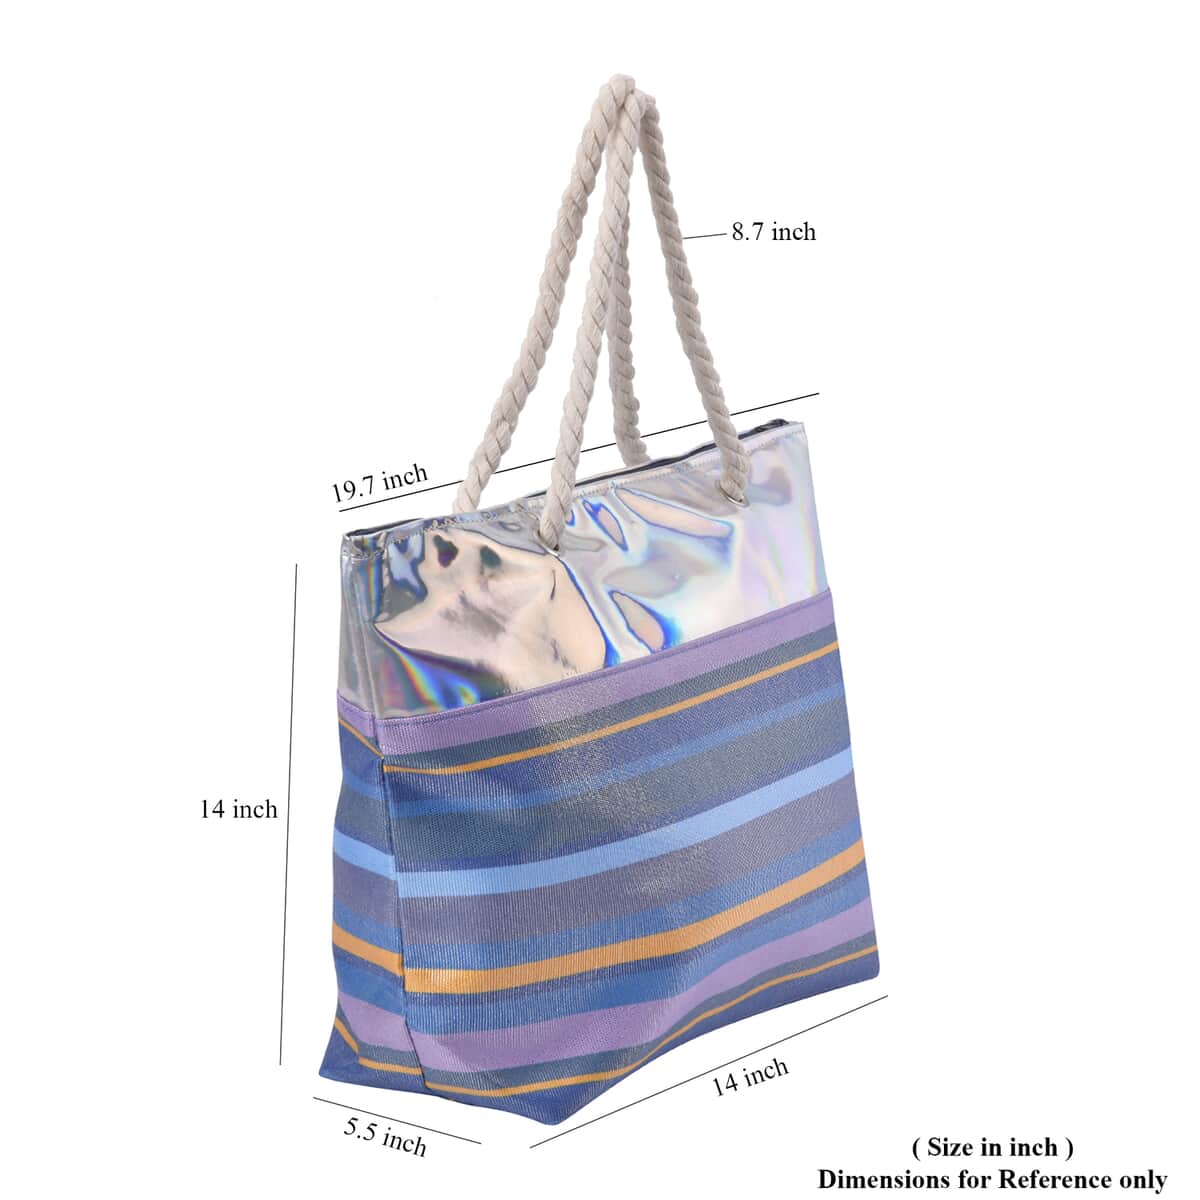 Blue and Gray Streak Pattern Canvas Faux Leather Tote Bag (19.7"x5.5"x14") image number 6